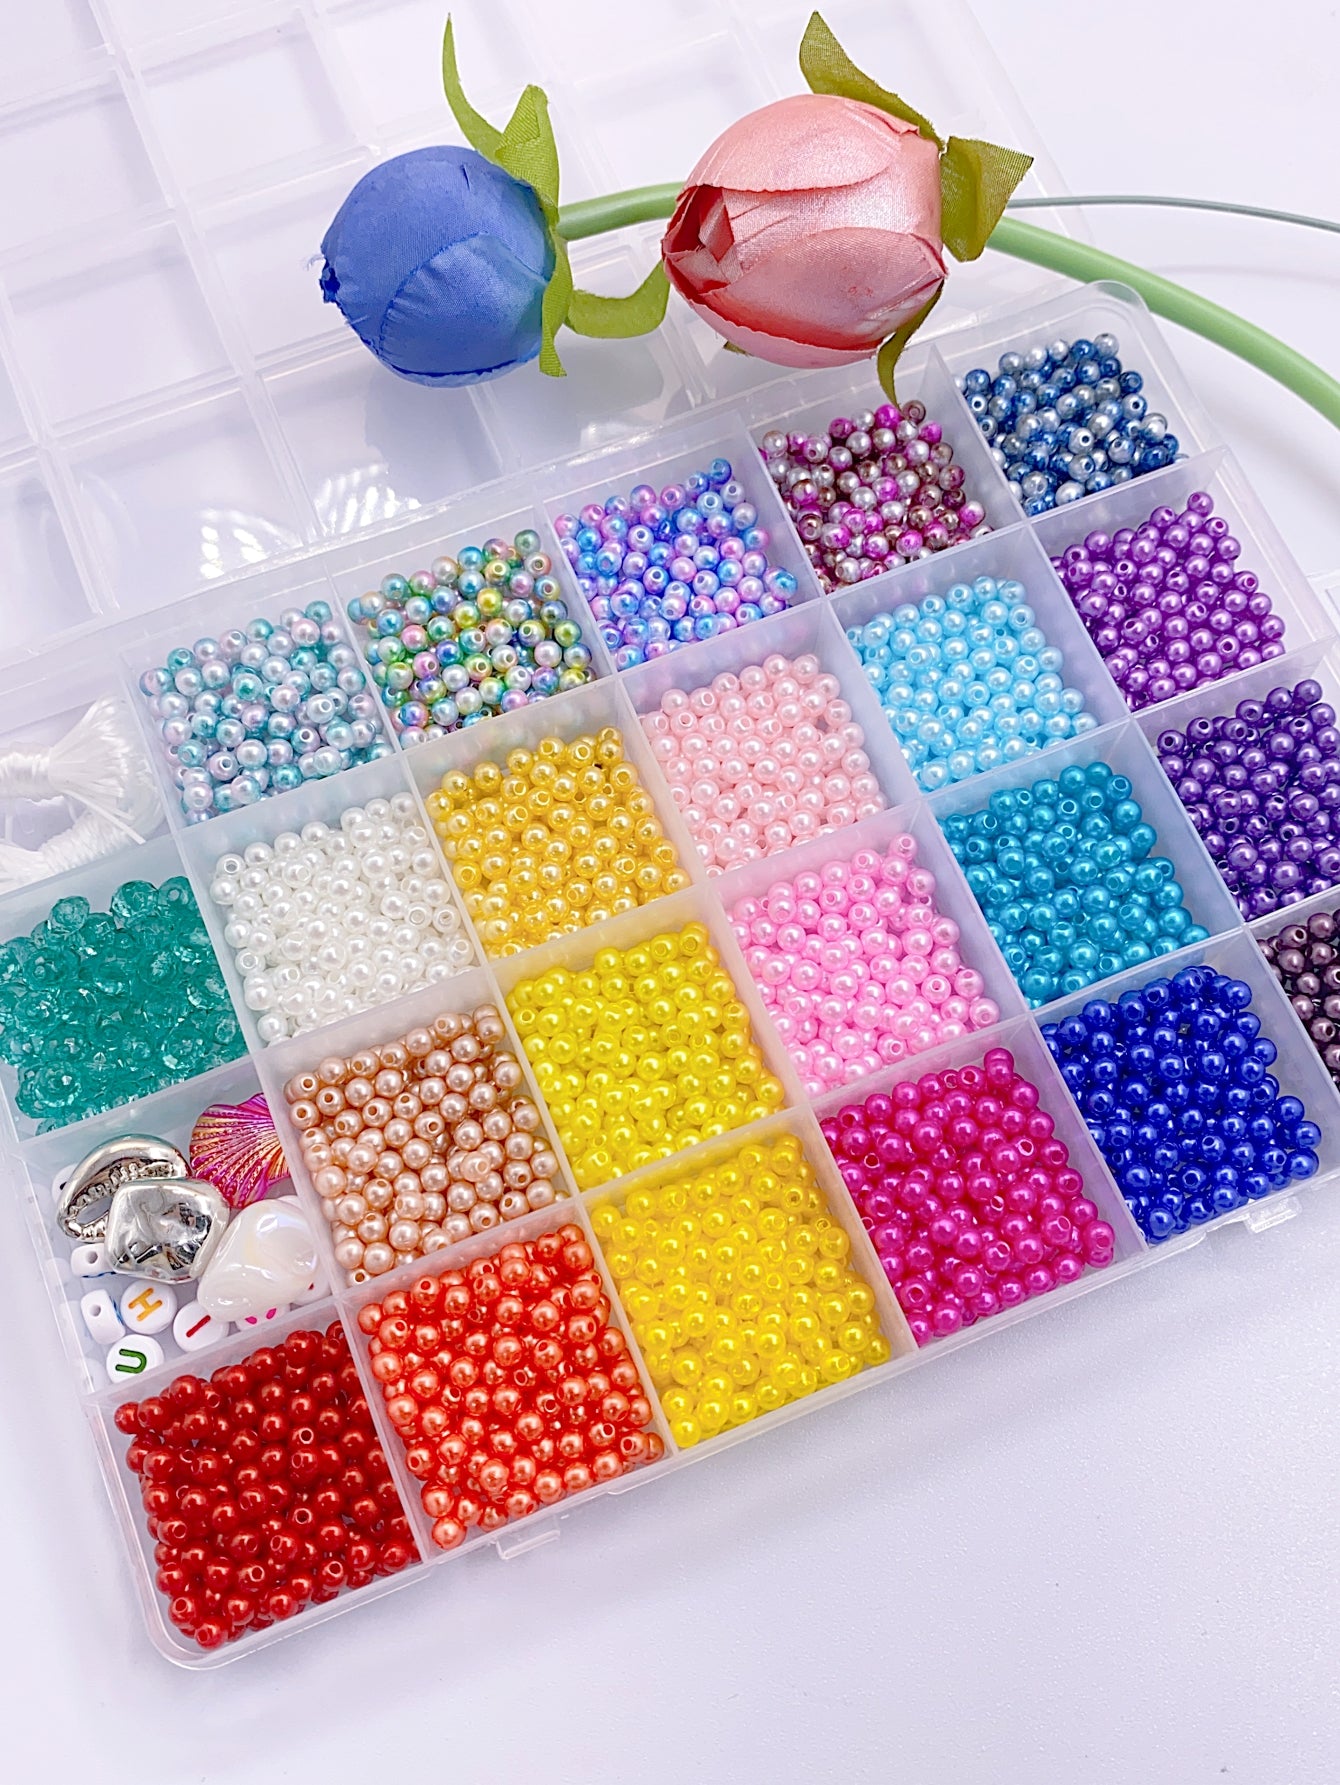 New hand-made diy24 palace abs seven-color straight hole imitation pearl mix children's puzzle beading material 1 box